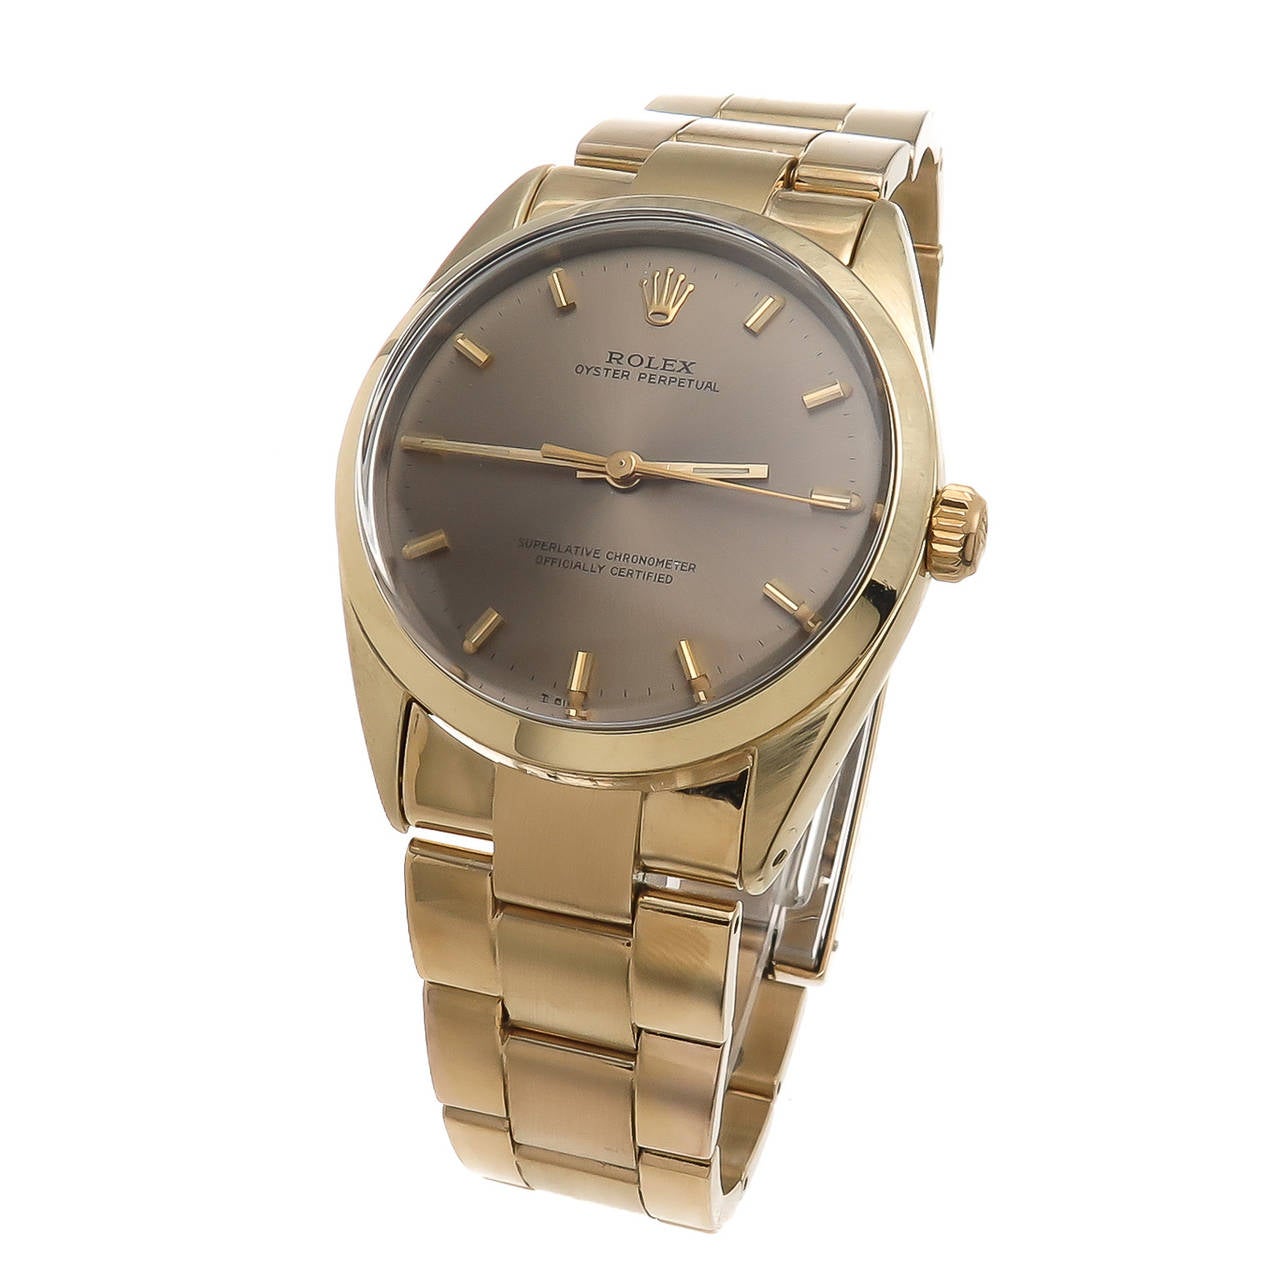 Rolex 1966 Gold Shell, steel back reference 1024 33 MM Case on a heavy Gold Shell Oyster Bracelet, very rare color Gray Dial with raised markers, Caliber 1570 26 jewel Automatic, self winding movement. An excellent condition, clean one owner watch